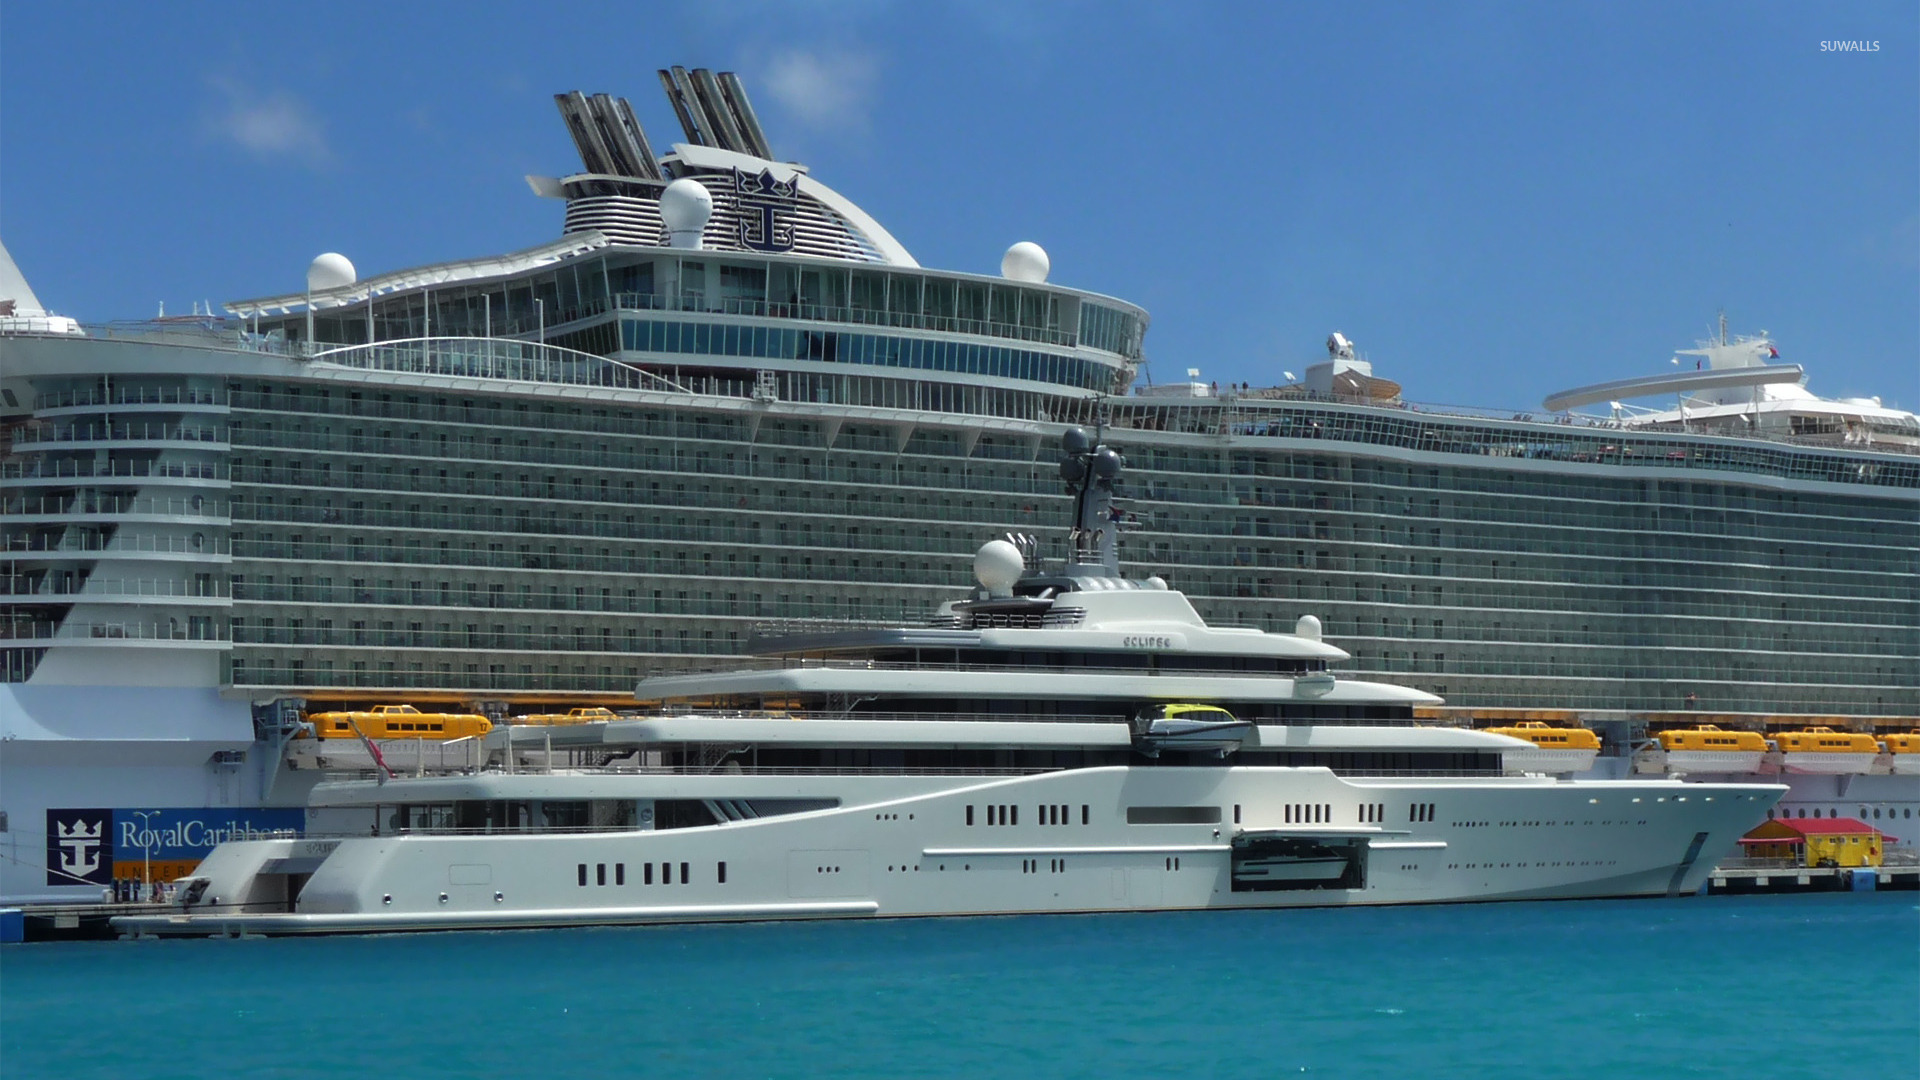 Cruise ship wallpaper   Photography wallpapers   32010 1920x1080